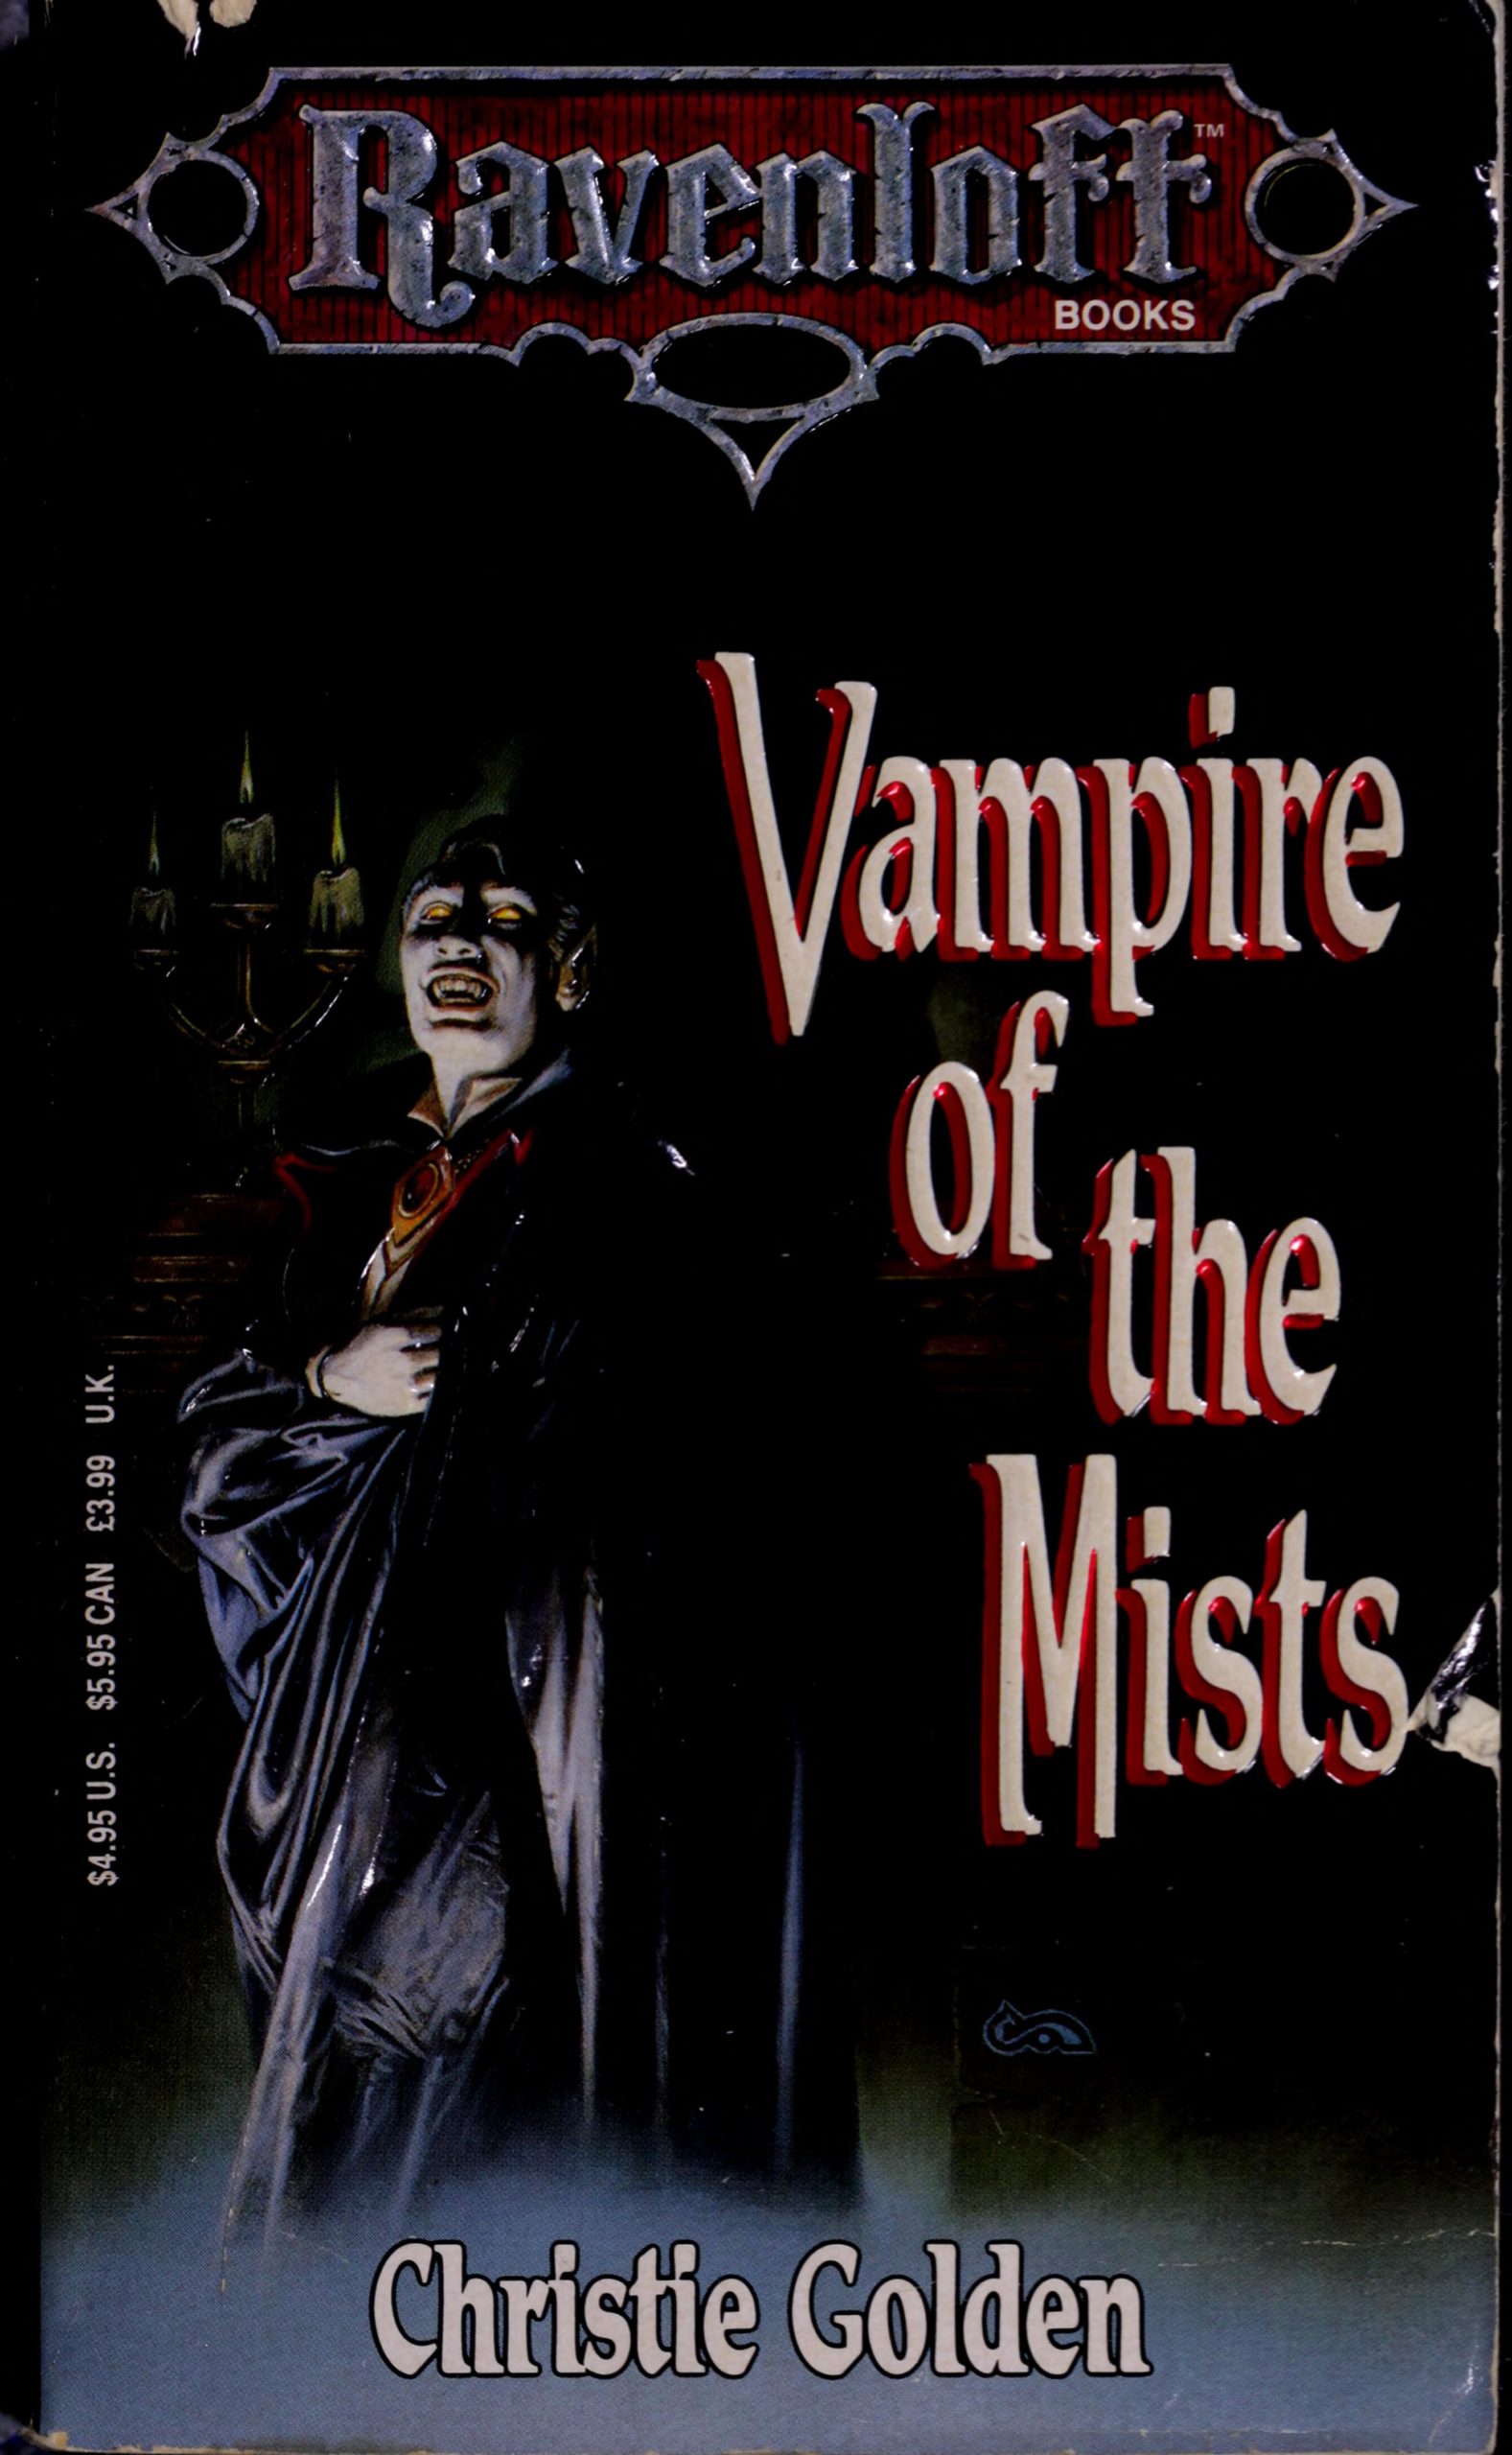 The original cover of Vampire of the Mists by Clyde Caldwell. So Dracula, you guys. (Image: Wizards of the Coast)